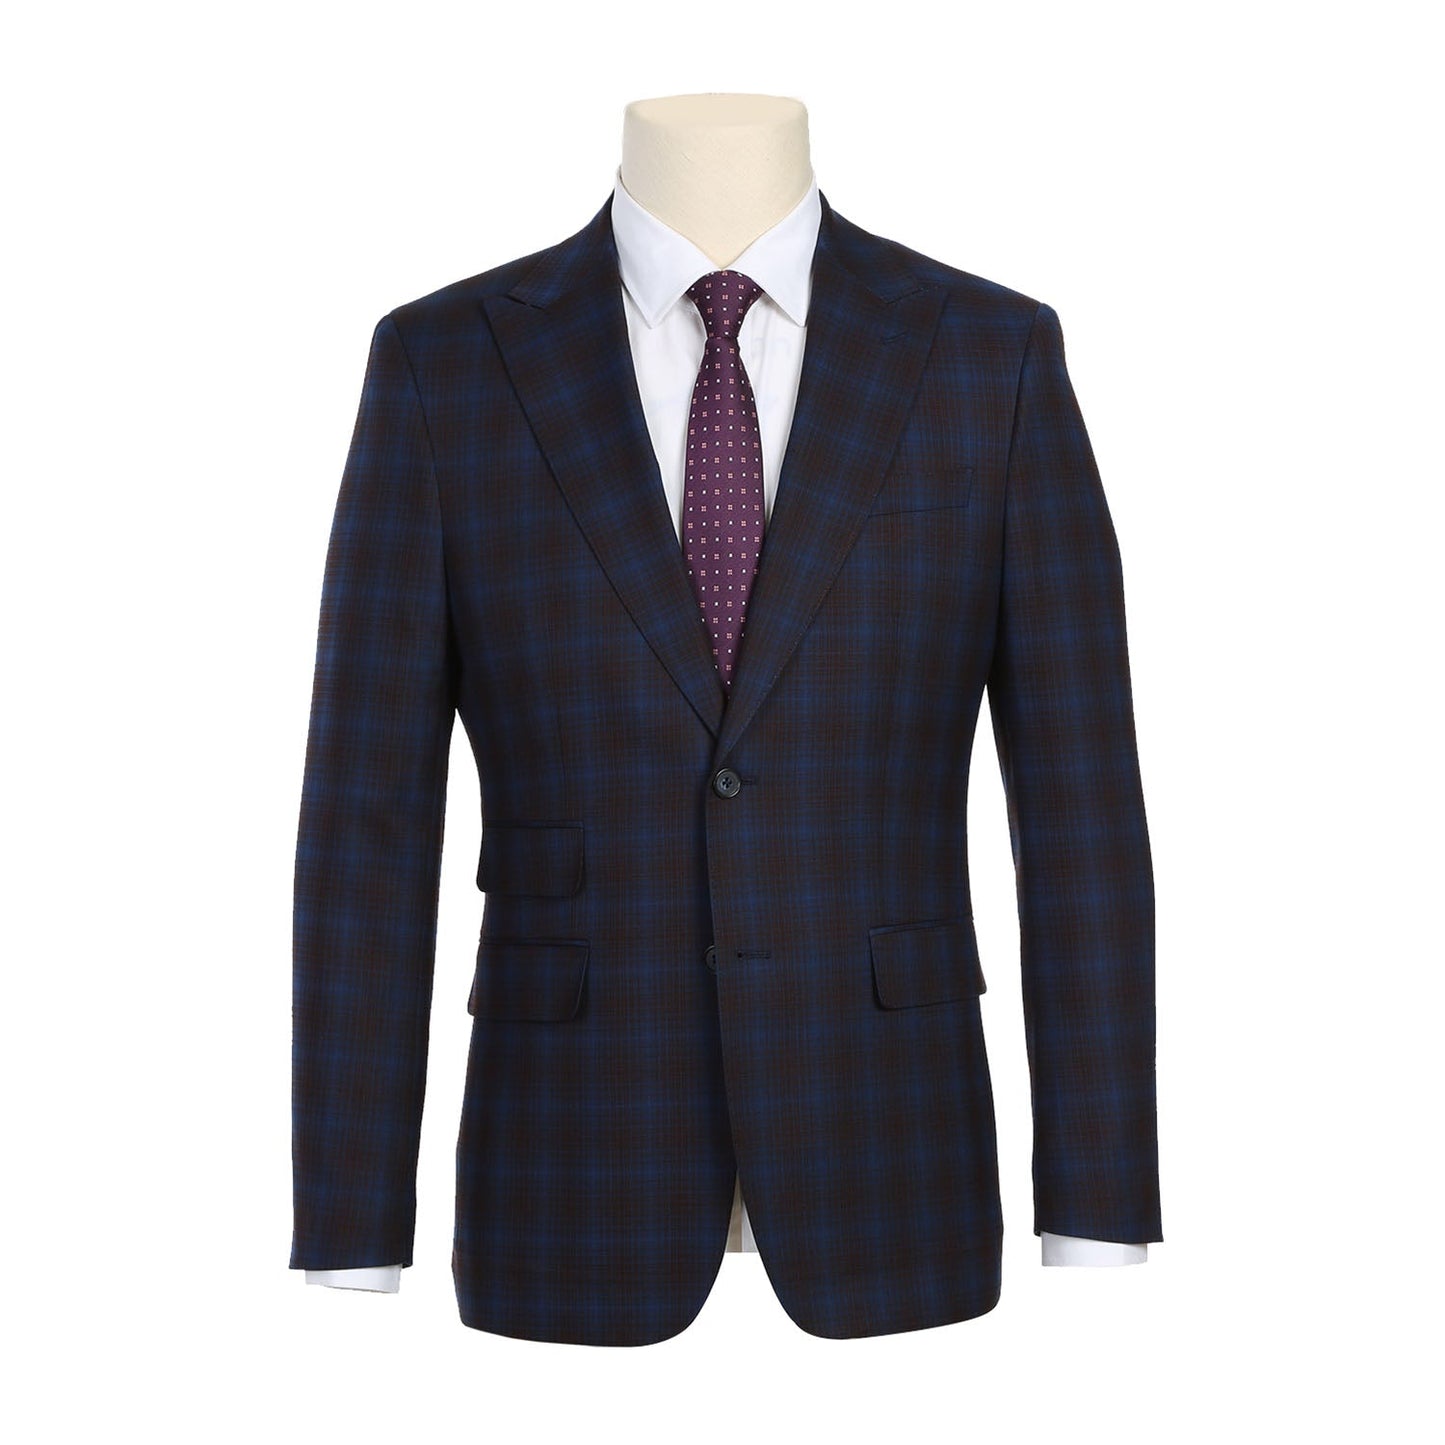 82-55-470EL Slim Fit English Laundry Navy with Burgundy Check Suit